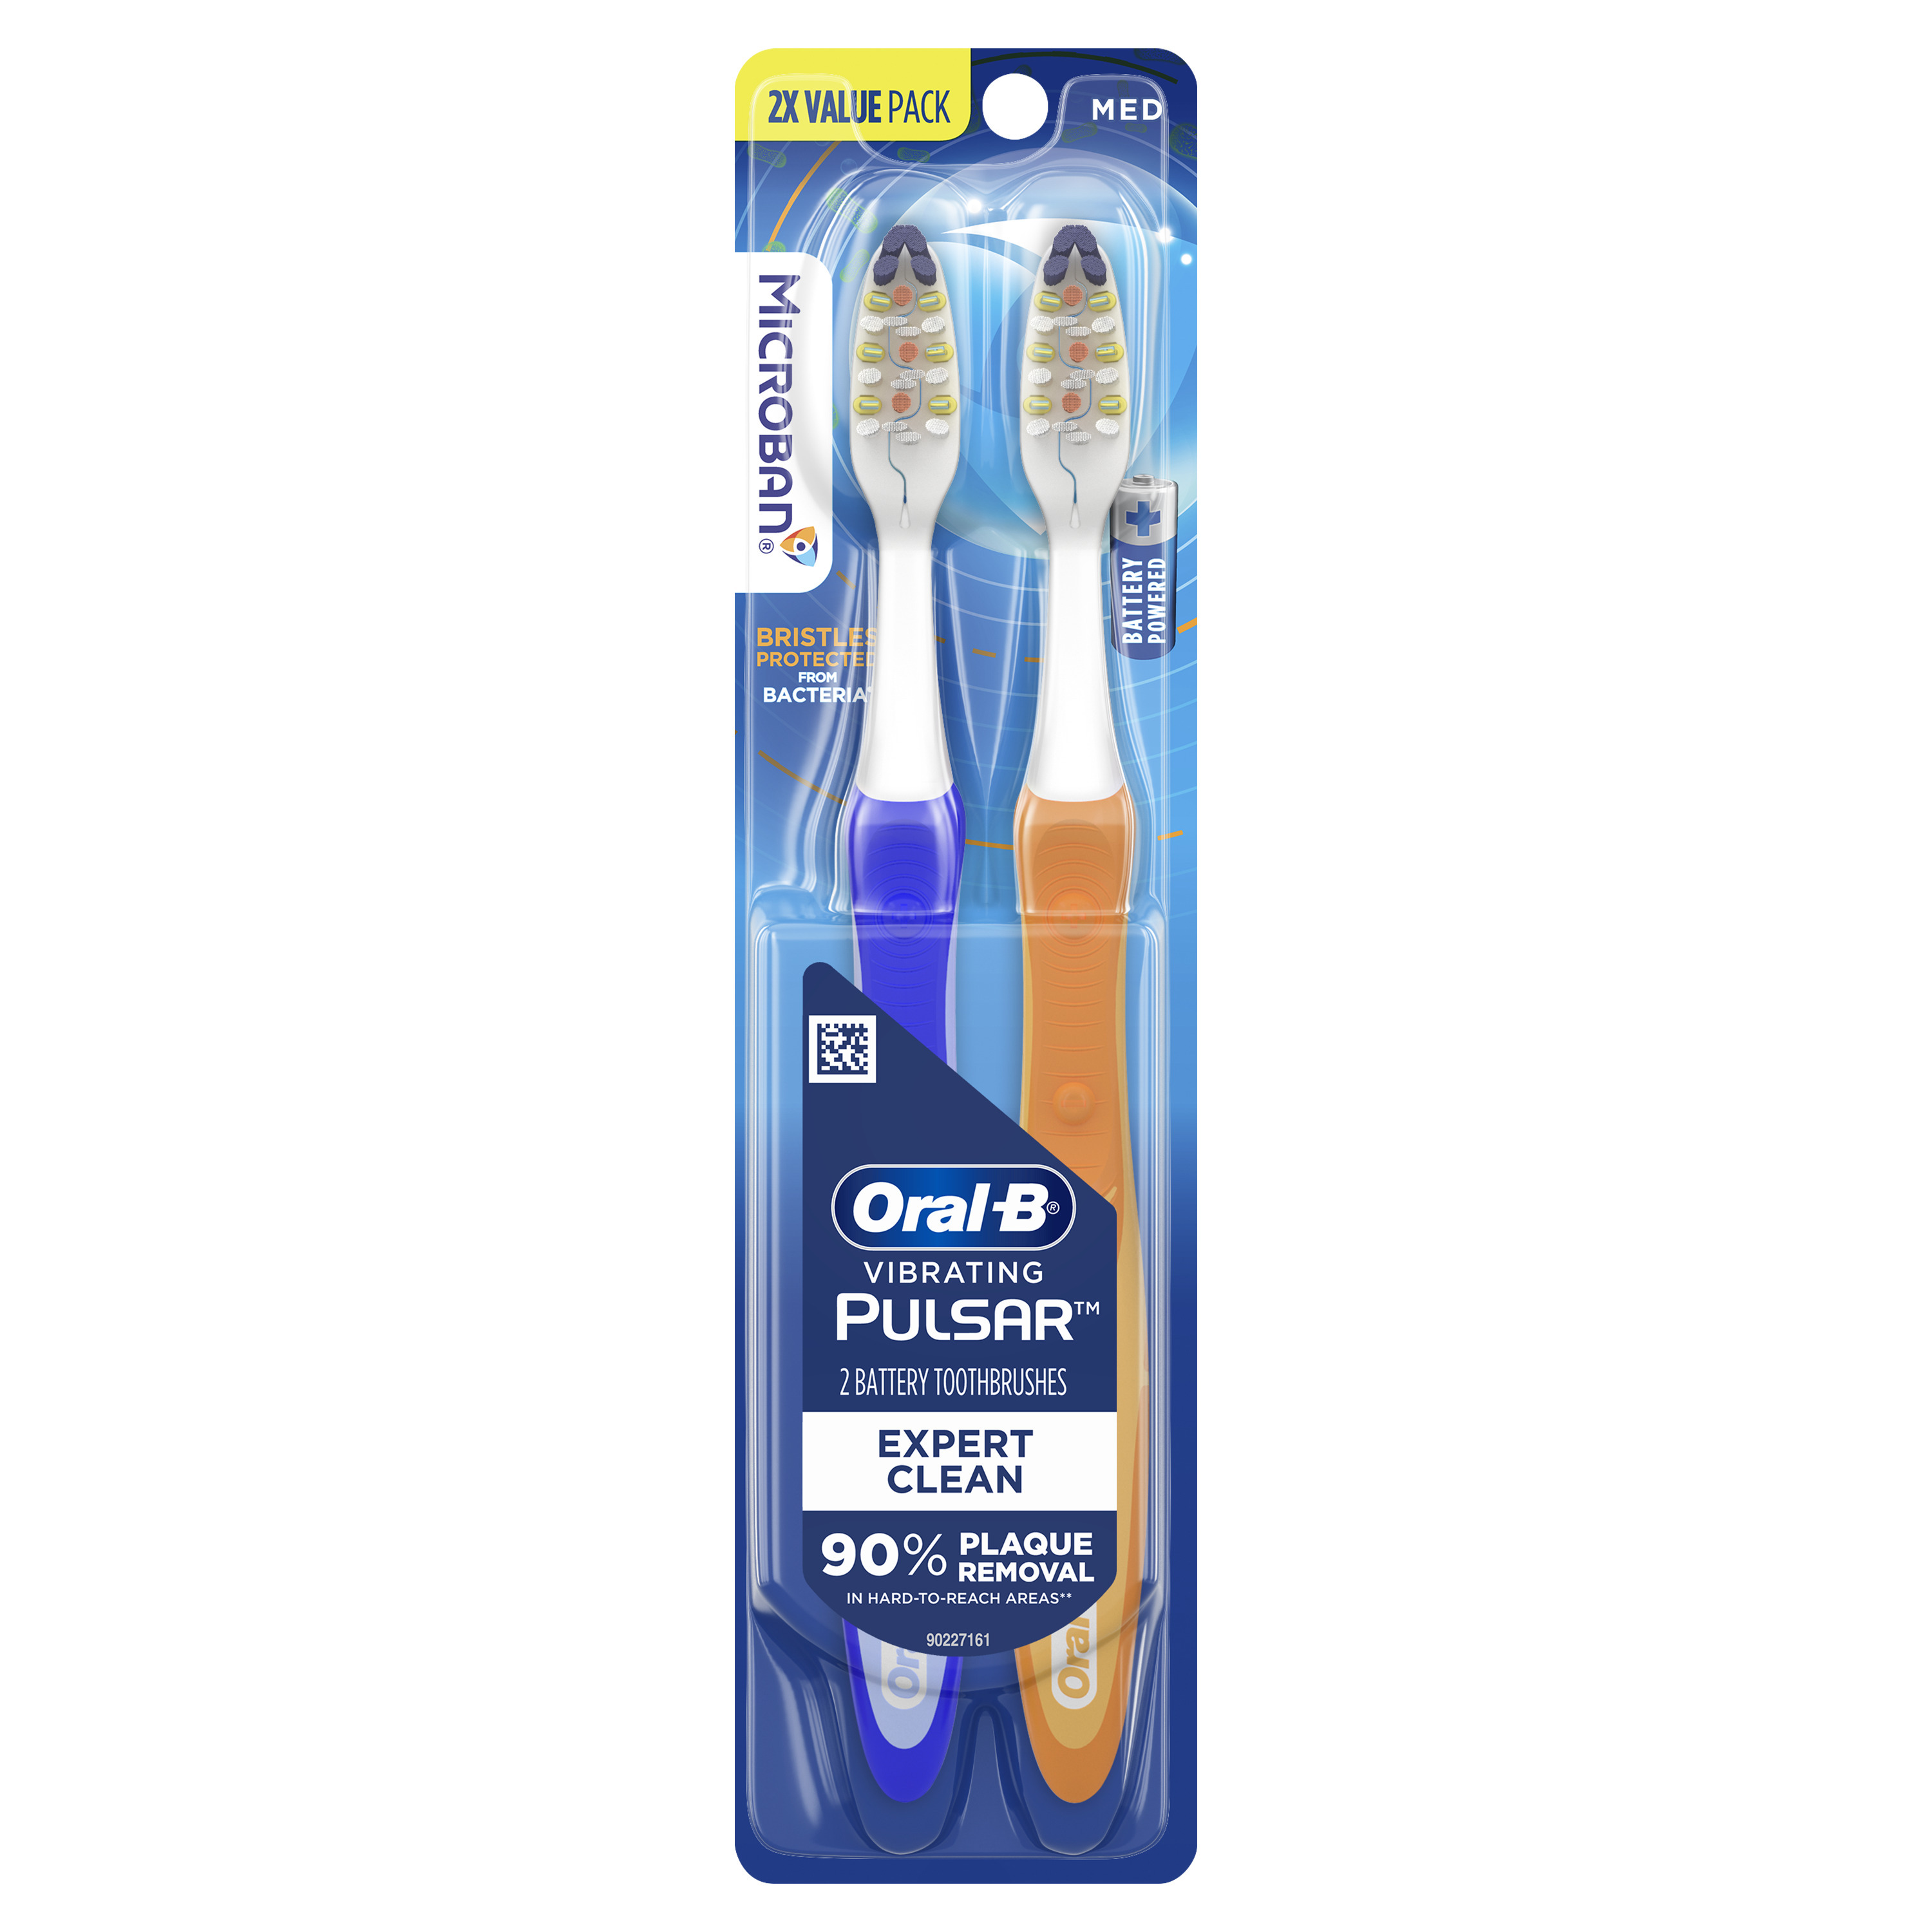 Oral-B Vibrating Pulsar Battery Toothbrushes, Full Head, Medium, 2 Count, for Adults and Children 3+ - image 1 of 10